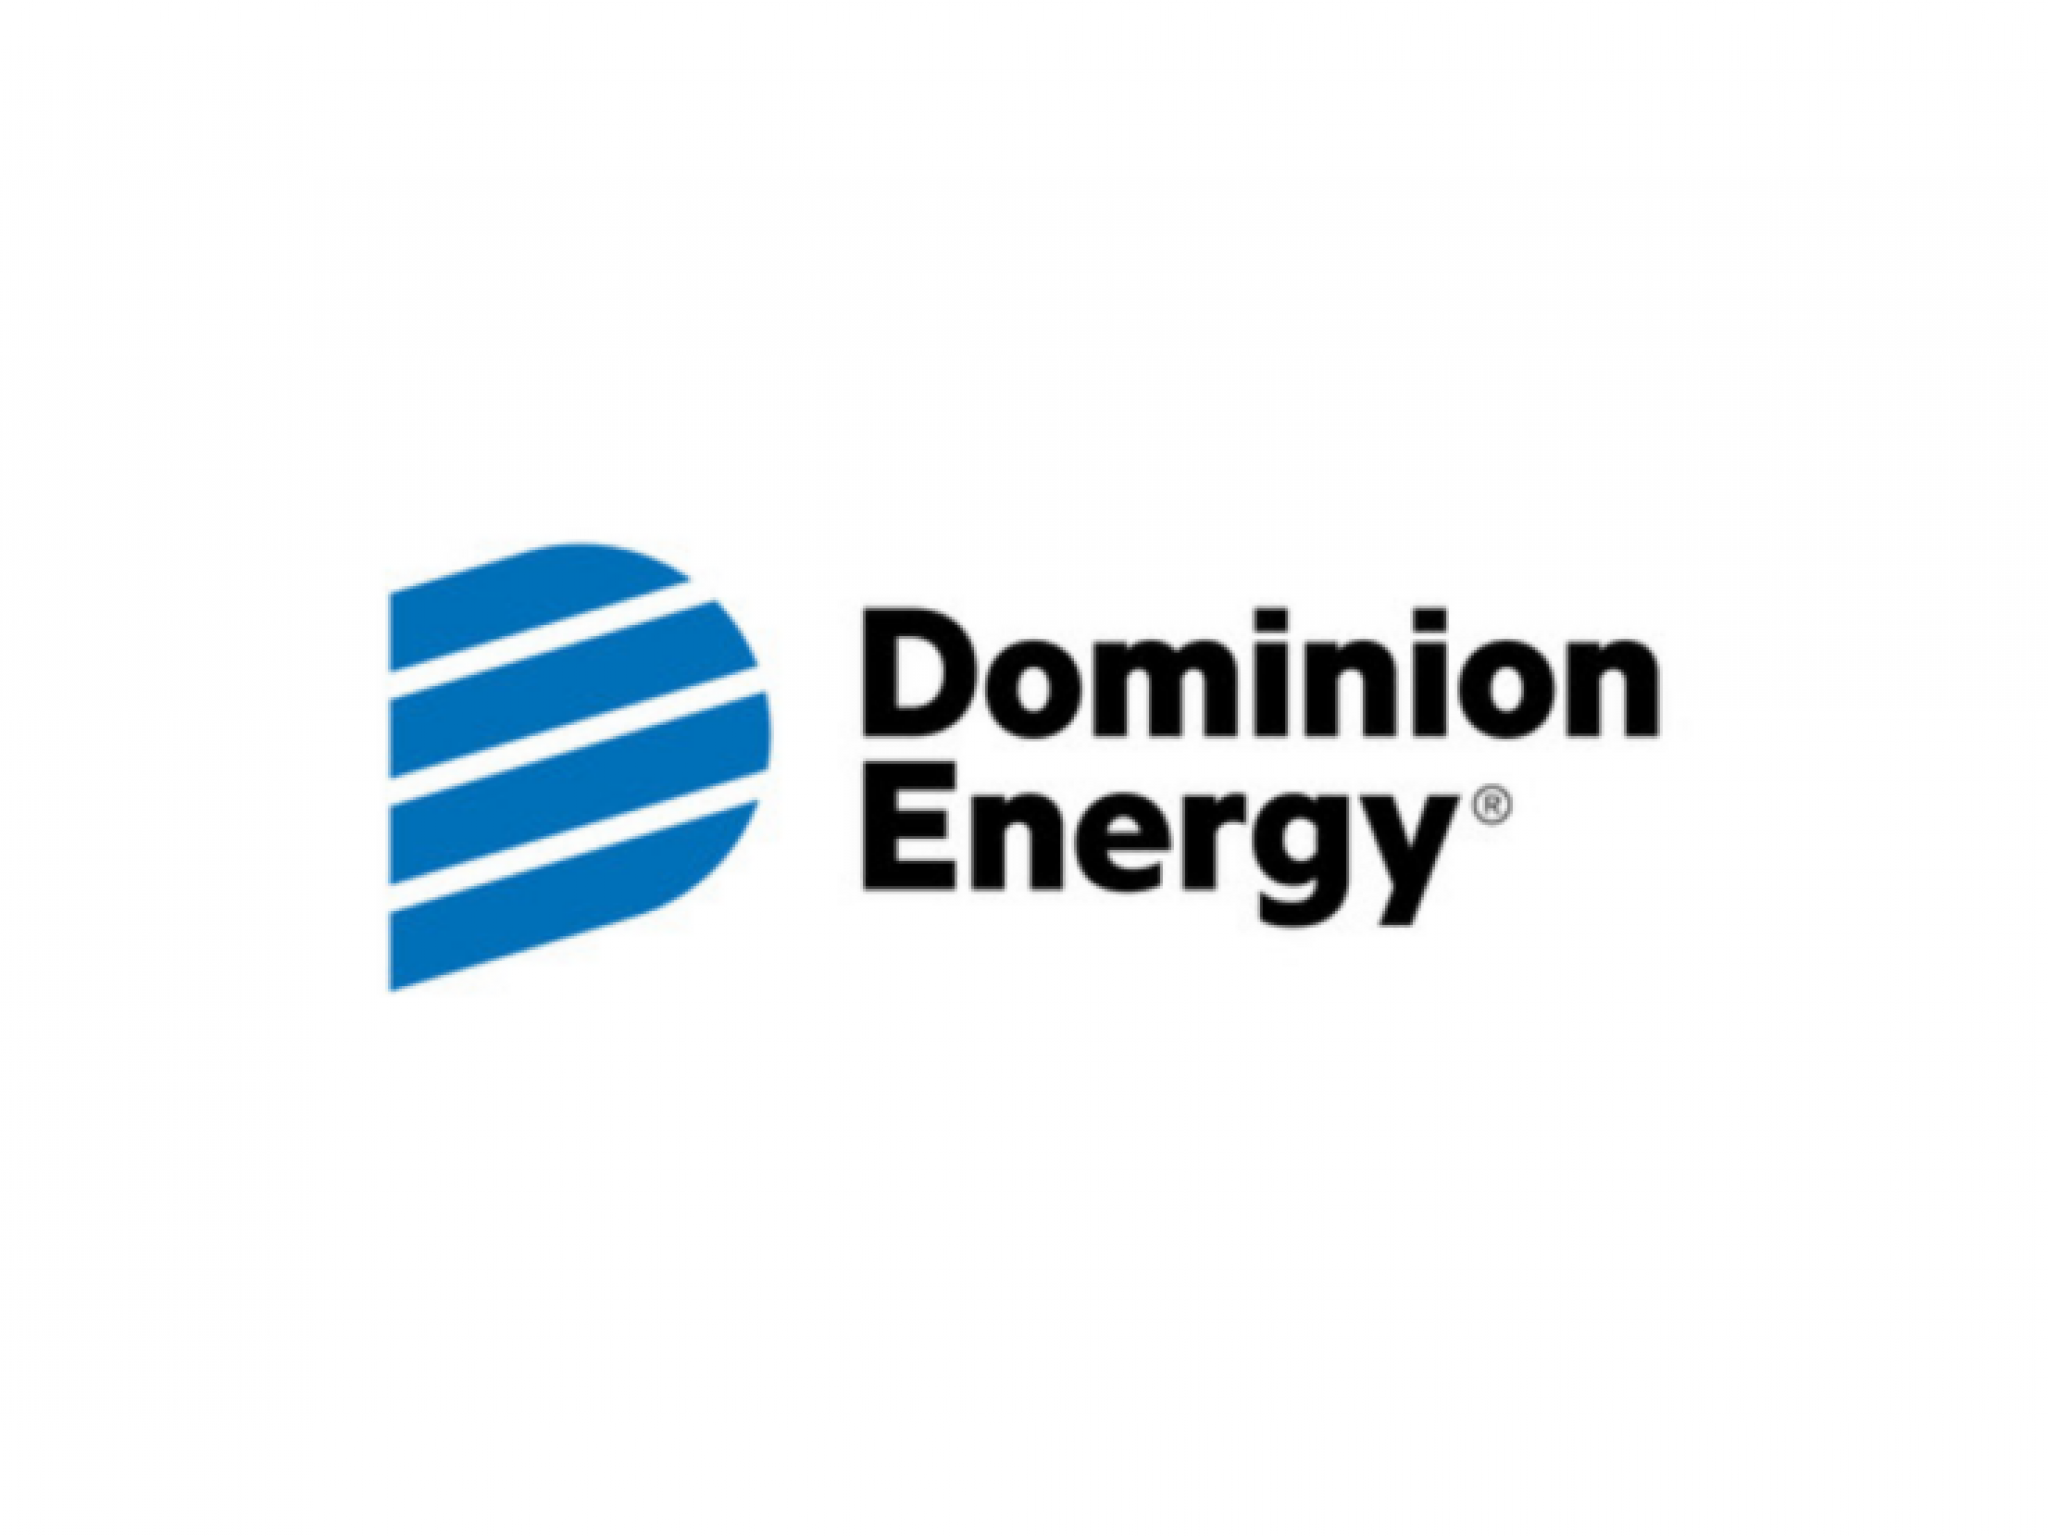  dominion-energy-reports-mixed-bag-of-q1-earnings-sticks-to-annual-guidance 